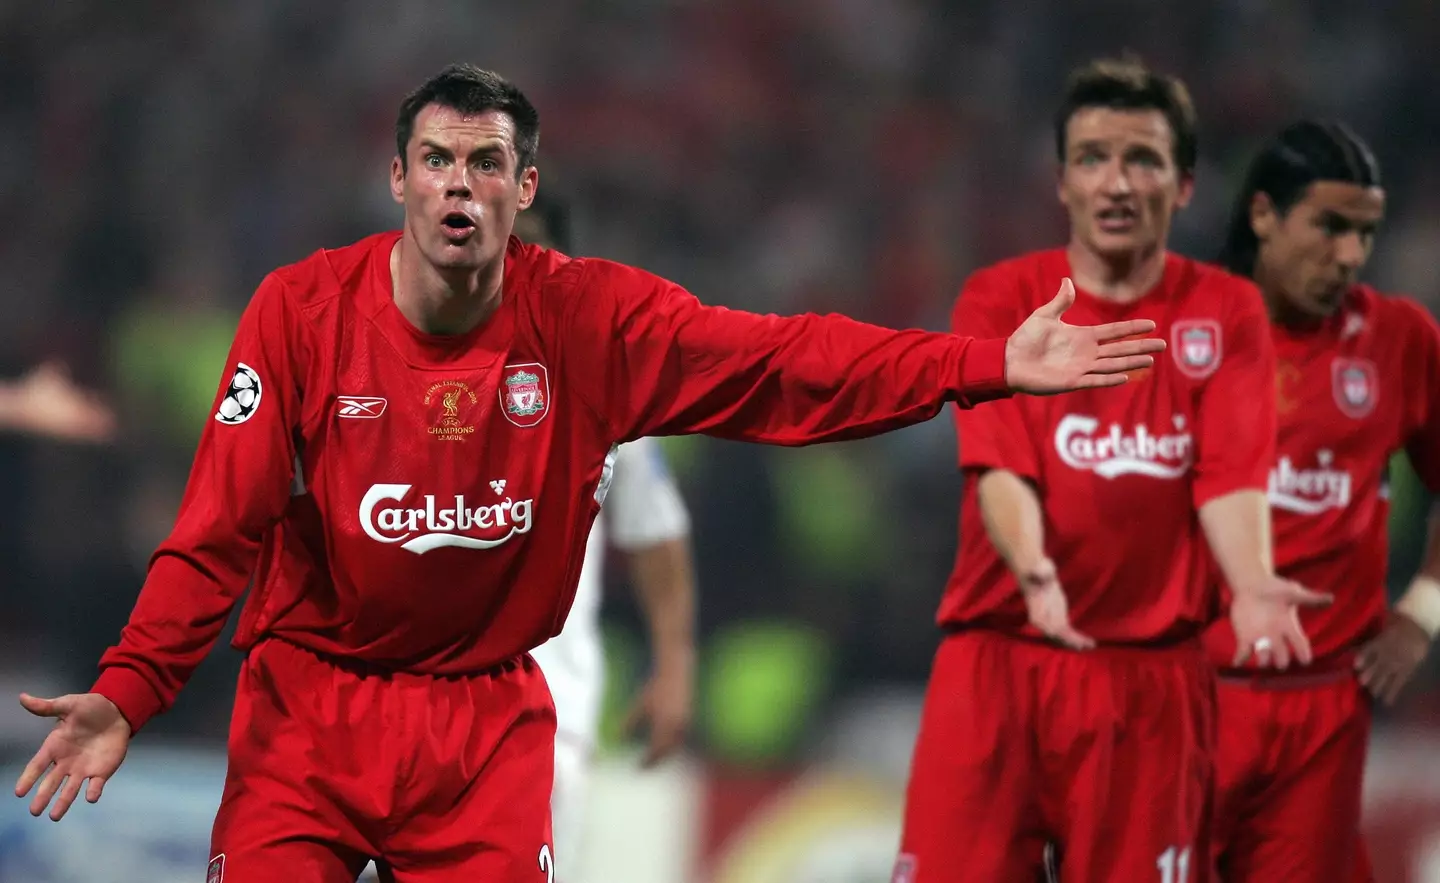 Jamie Carragher played in the 2005 Champions League final (